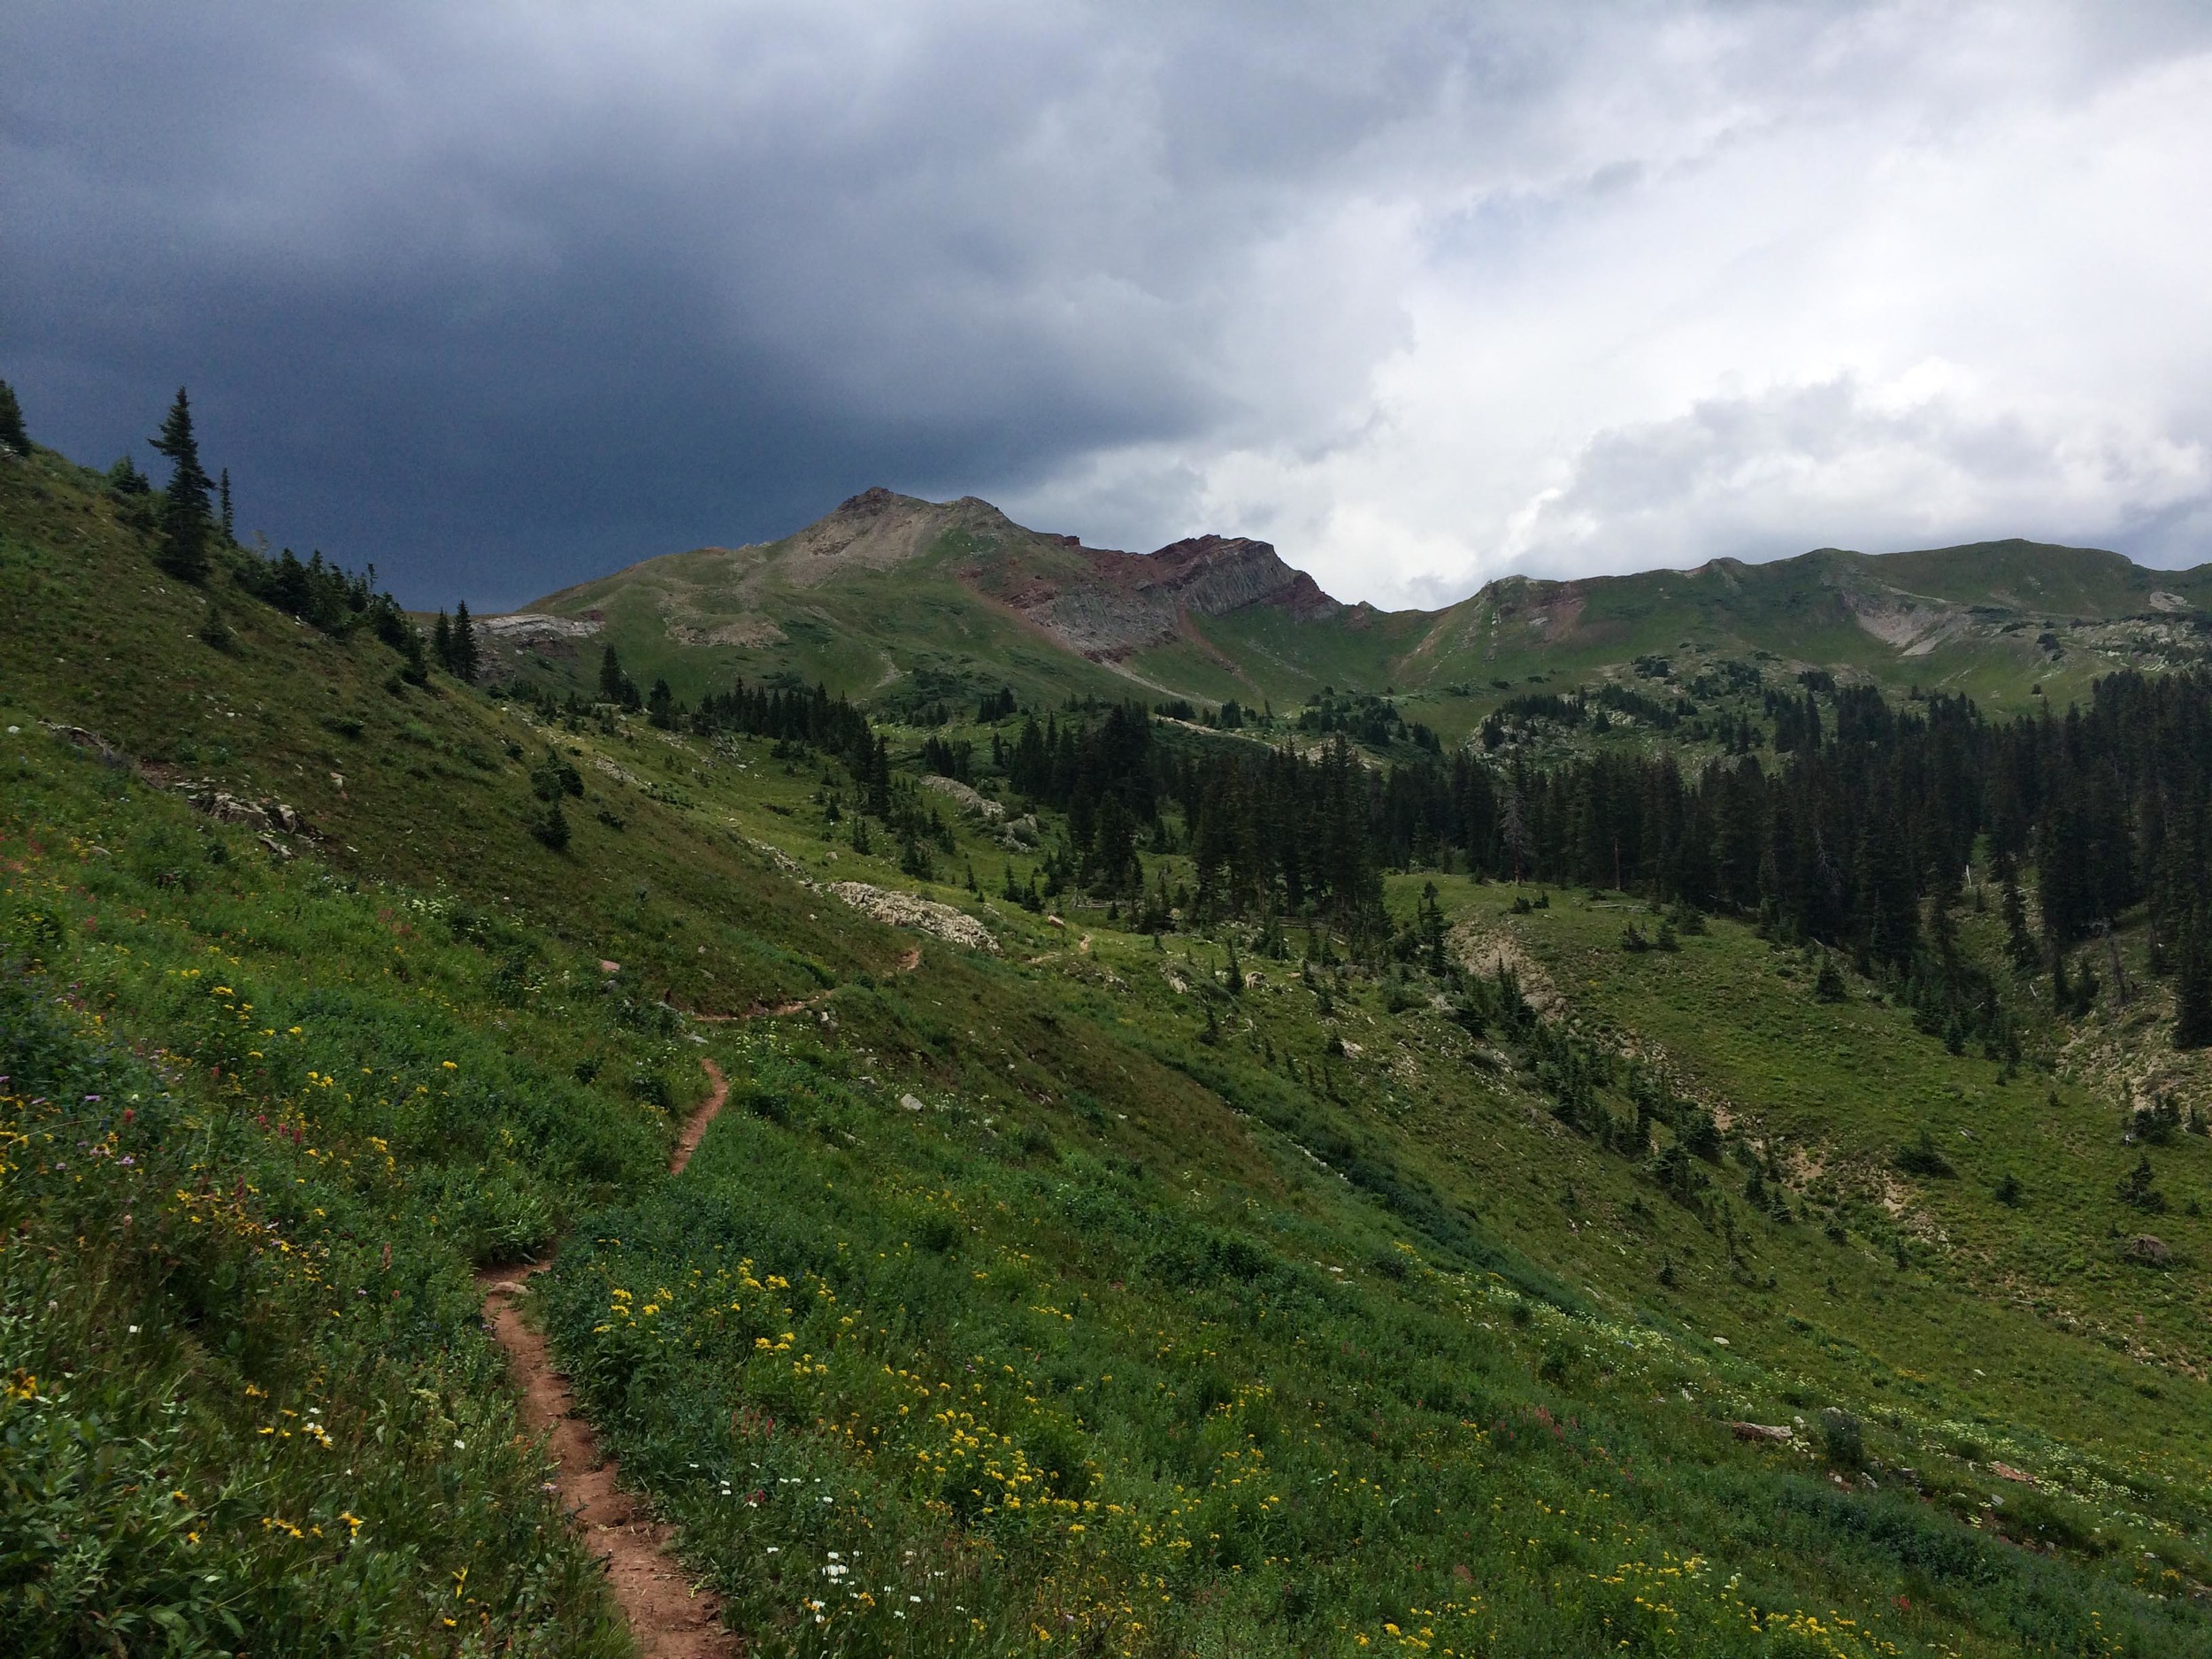  Storm clouds brewing over Black Hawk Pass. PHOTO BY WILLOW BELDEN 